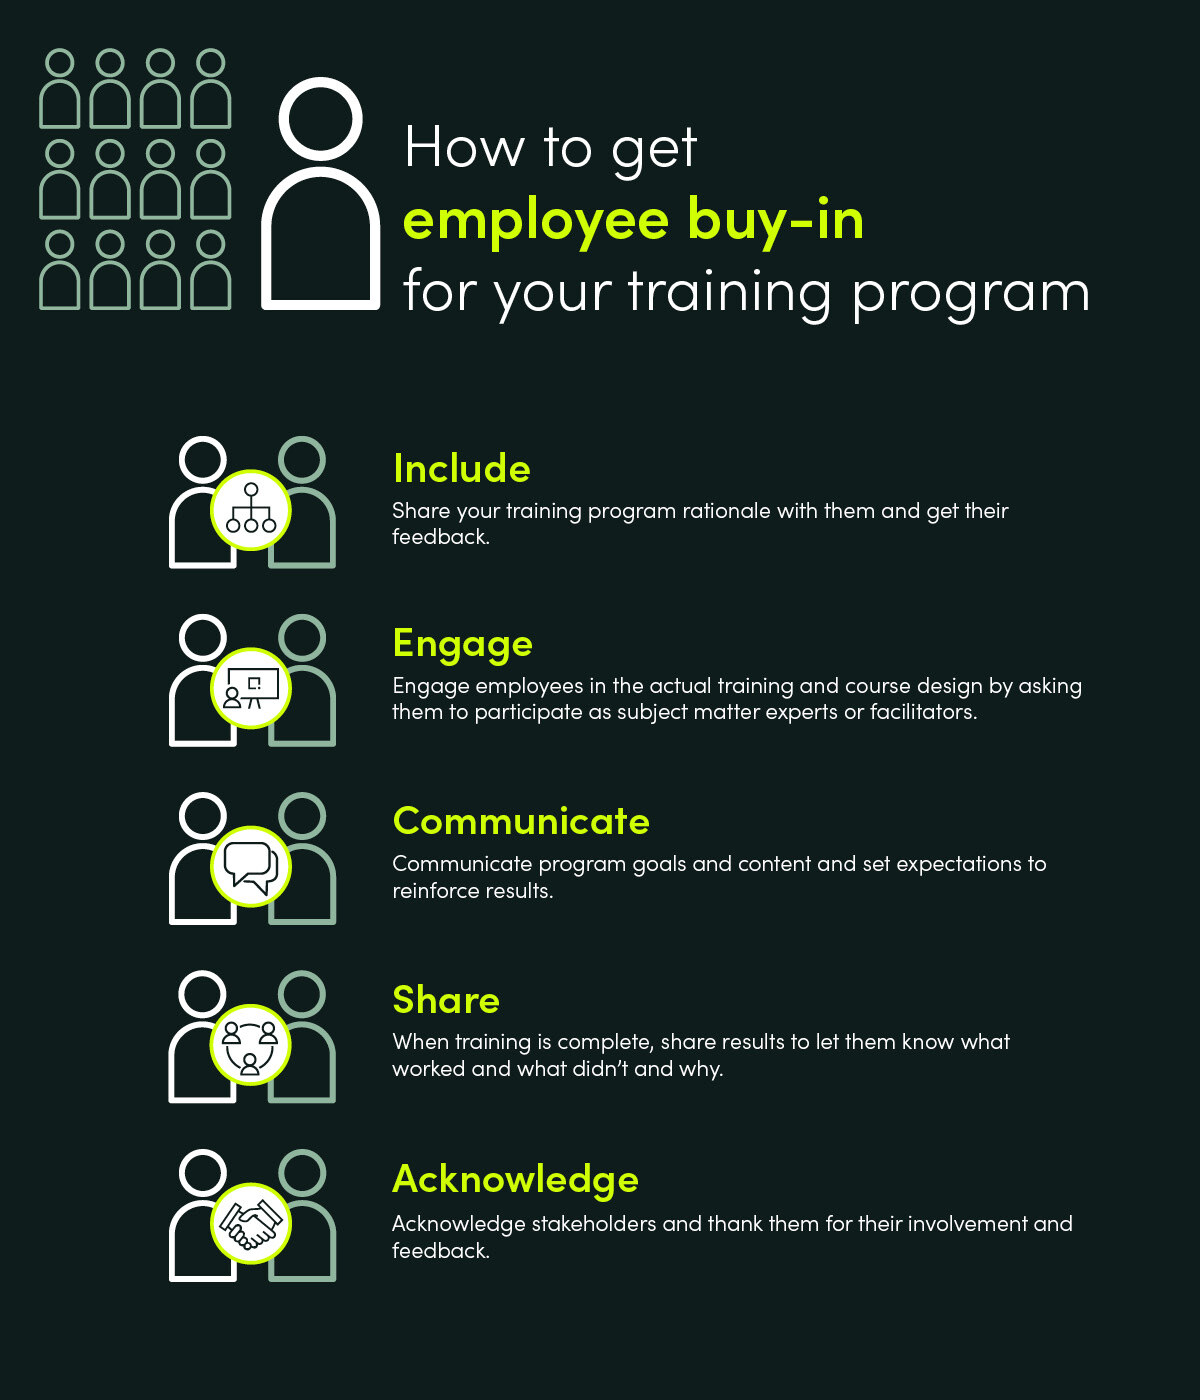 How to get employee buy-in for your training program